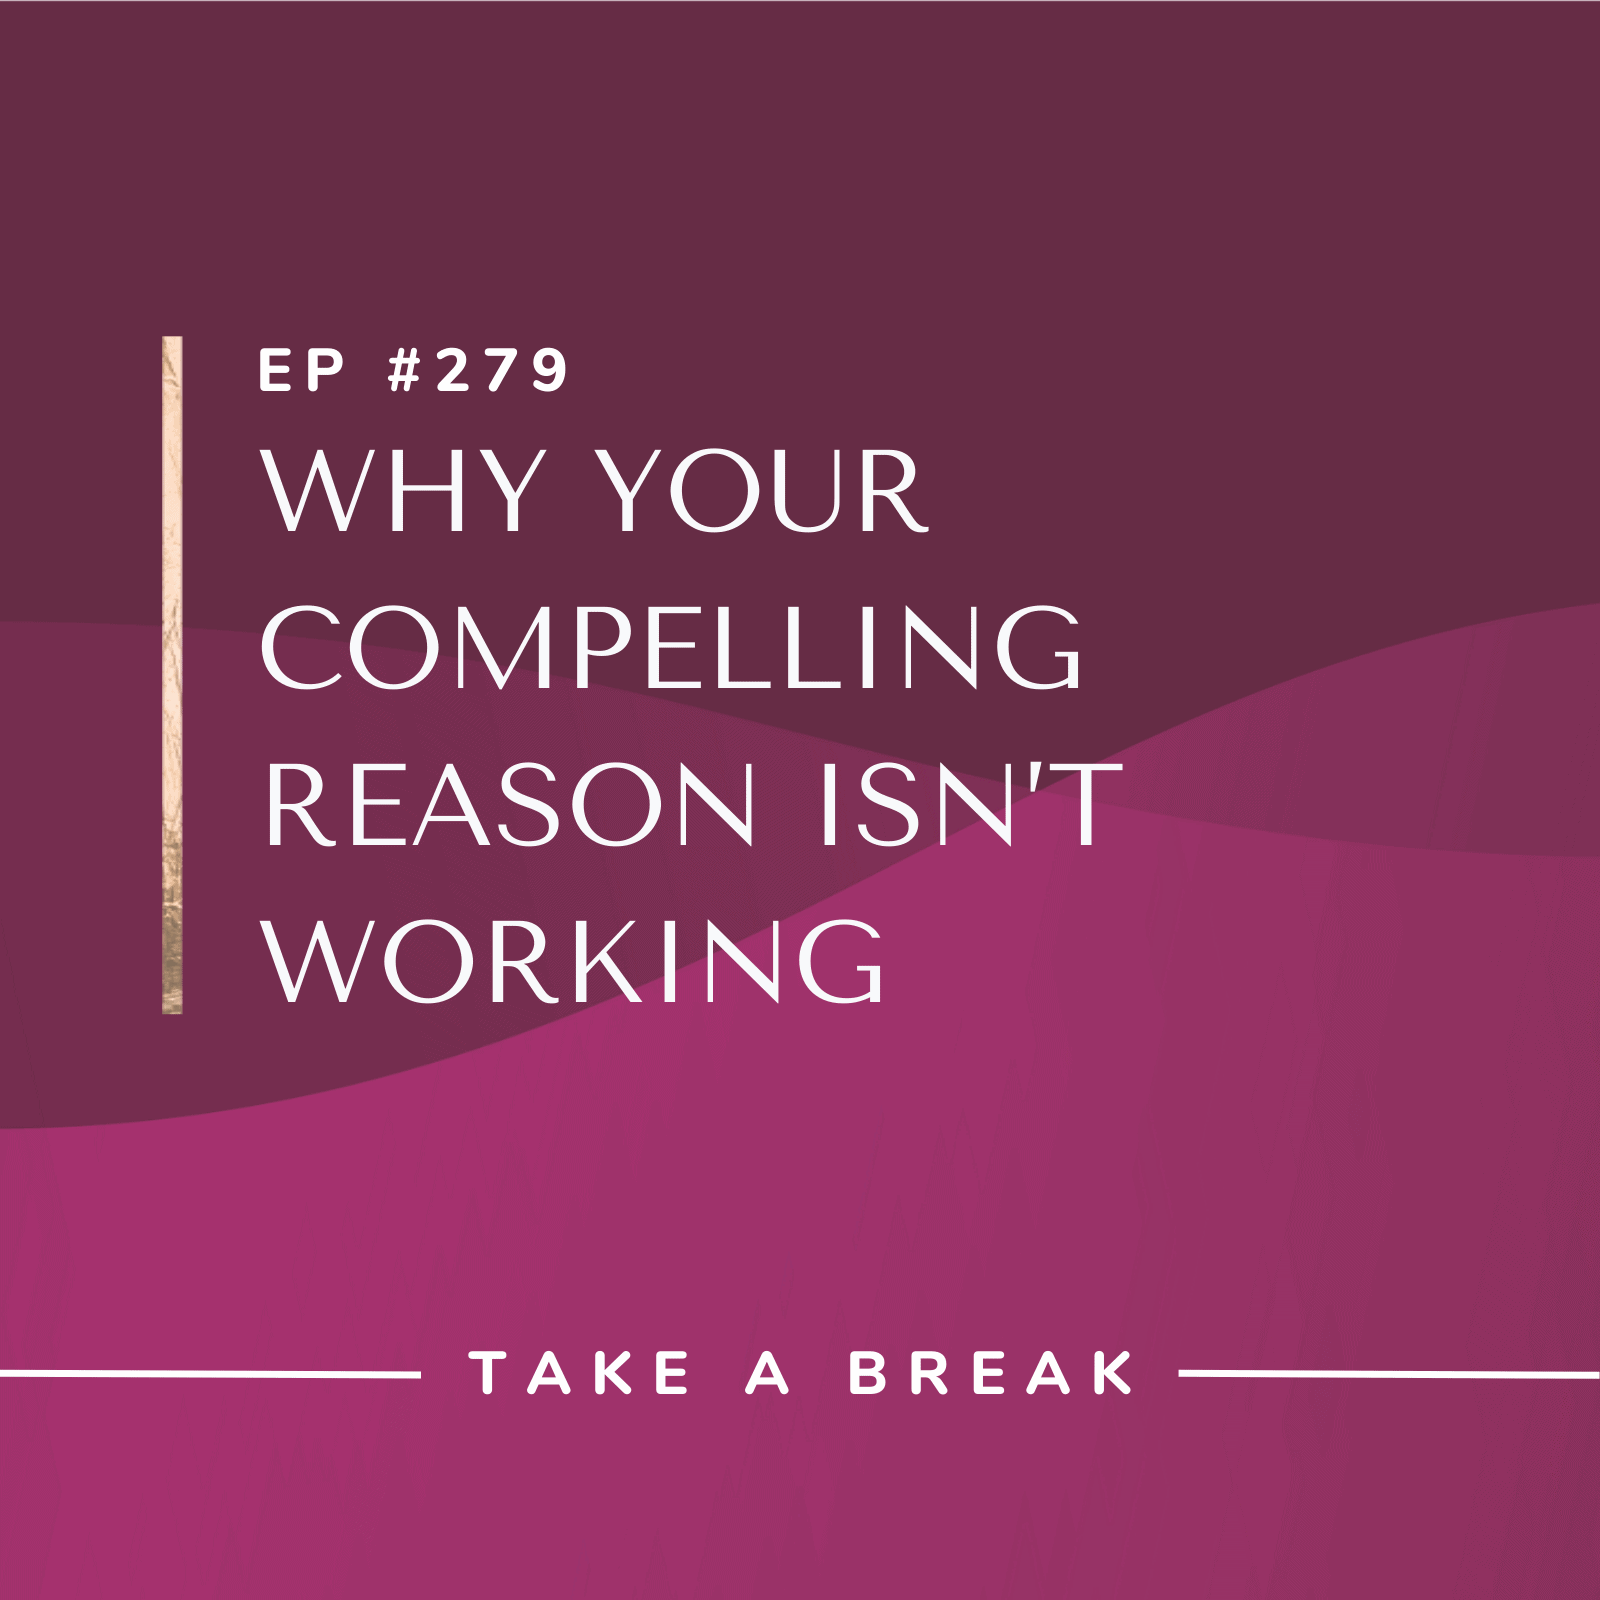 Take A Break from Drinking Why Your Compelling Reason Isn’t Working